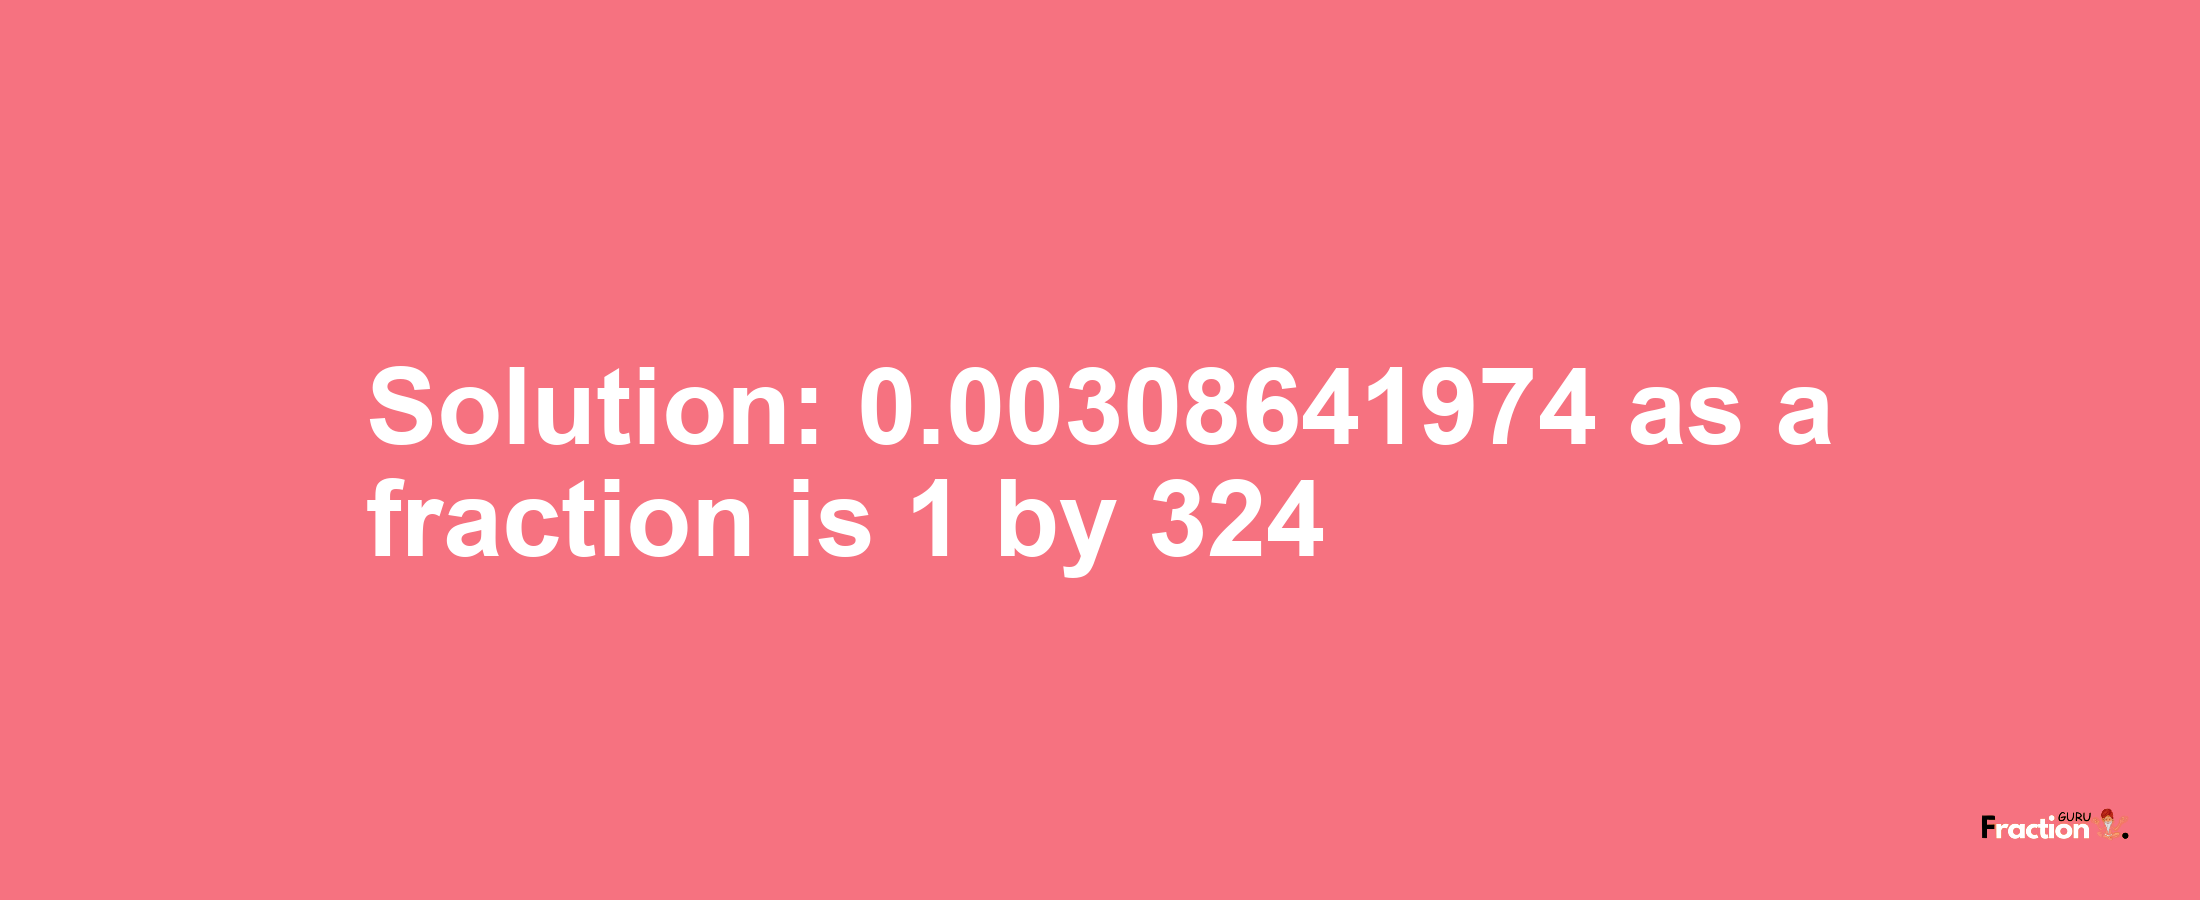 Solution:0.00308641974 as a fraction is 1/324